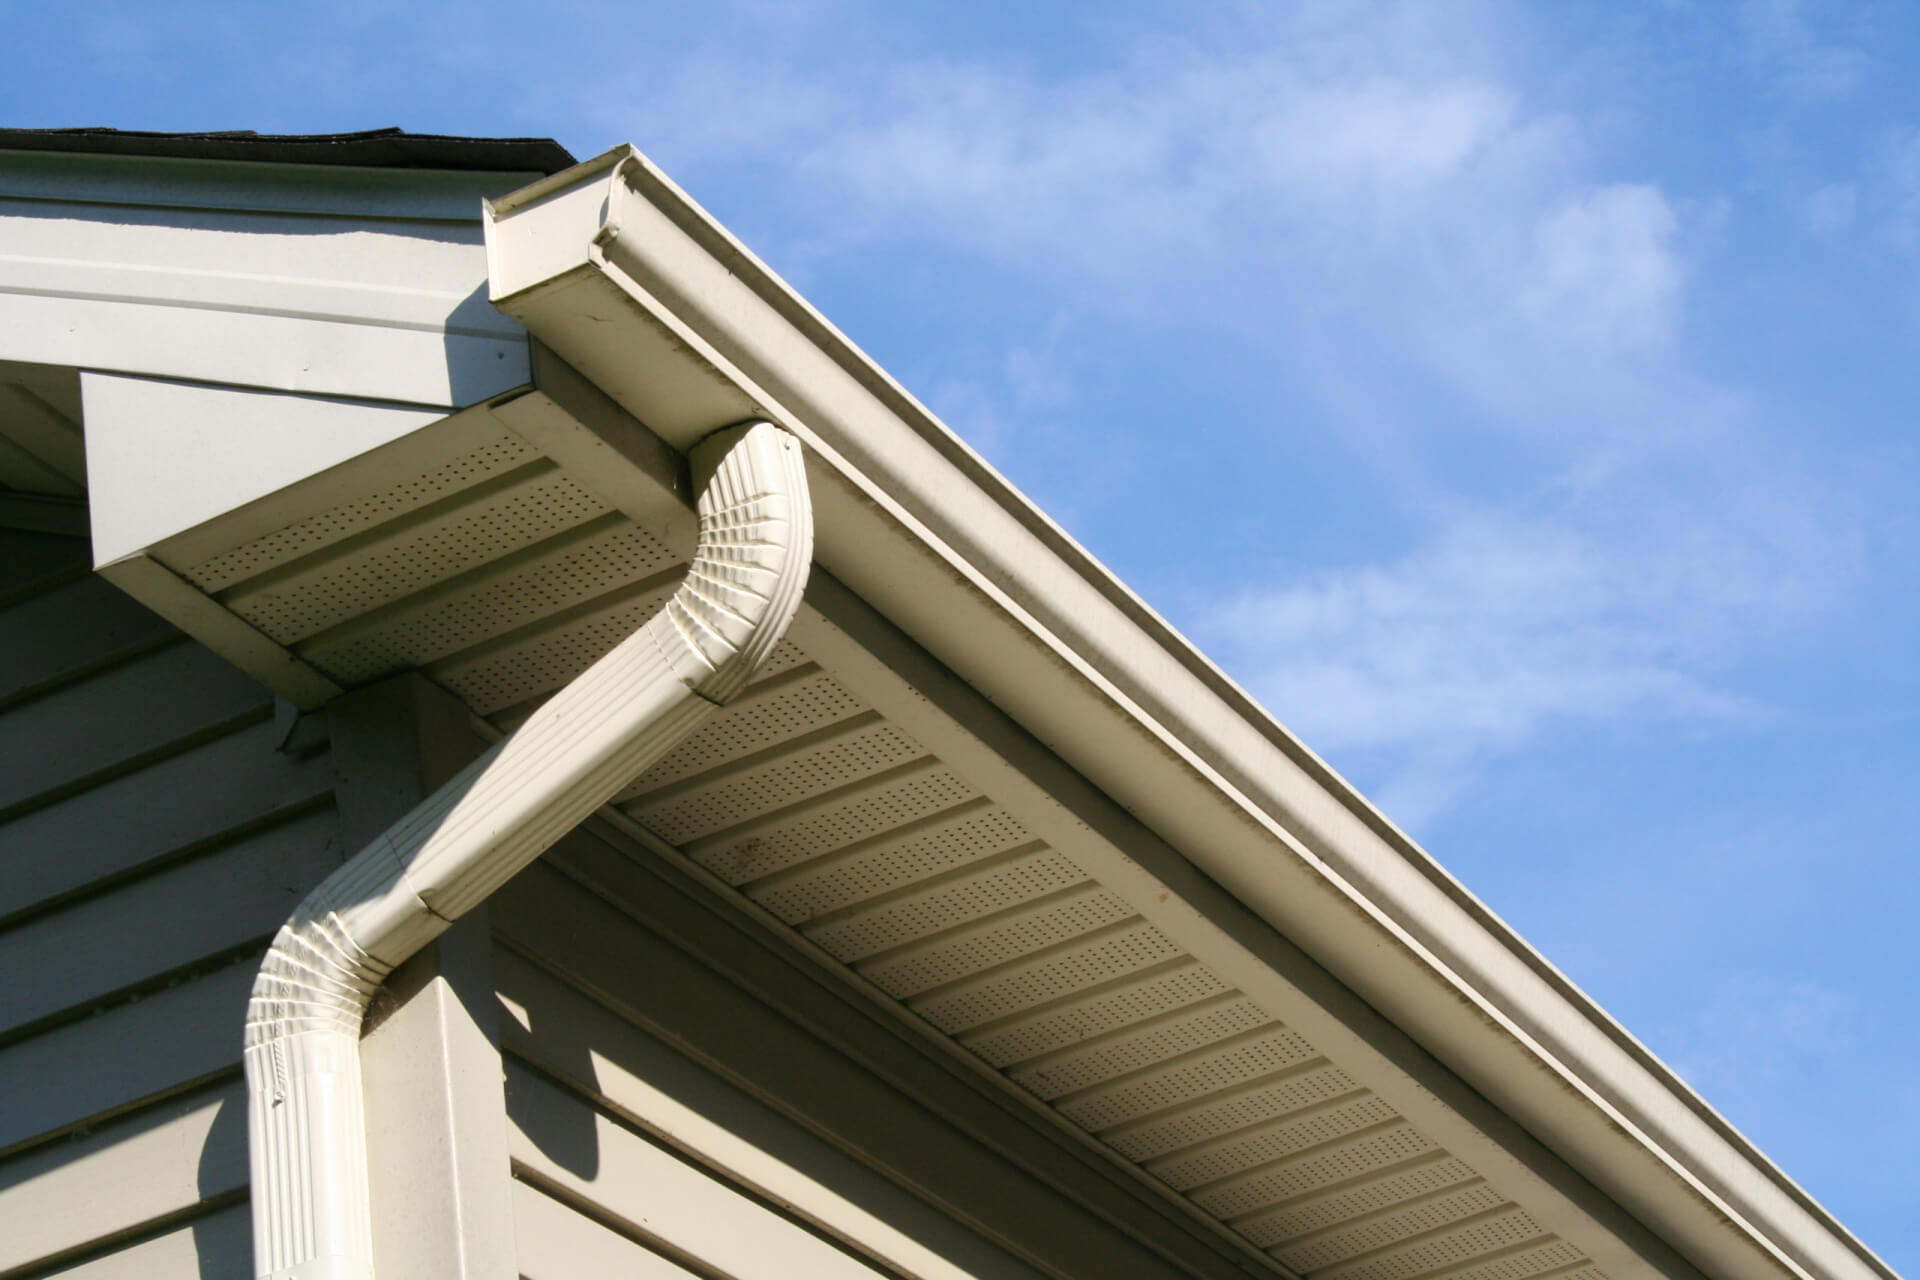 Angled view of gutter and downspout on a house